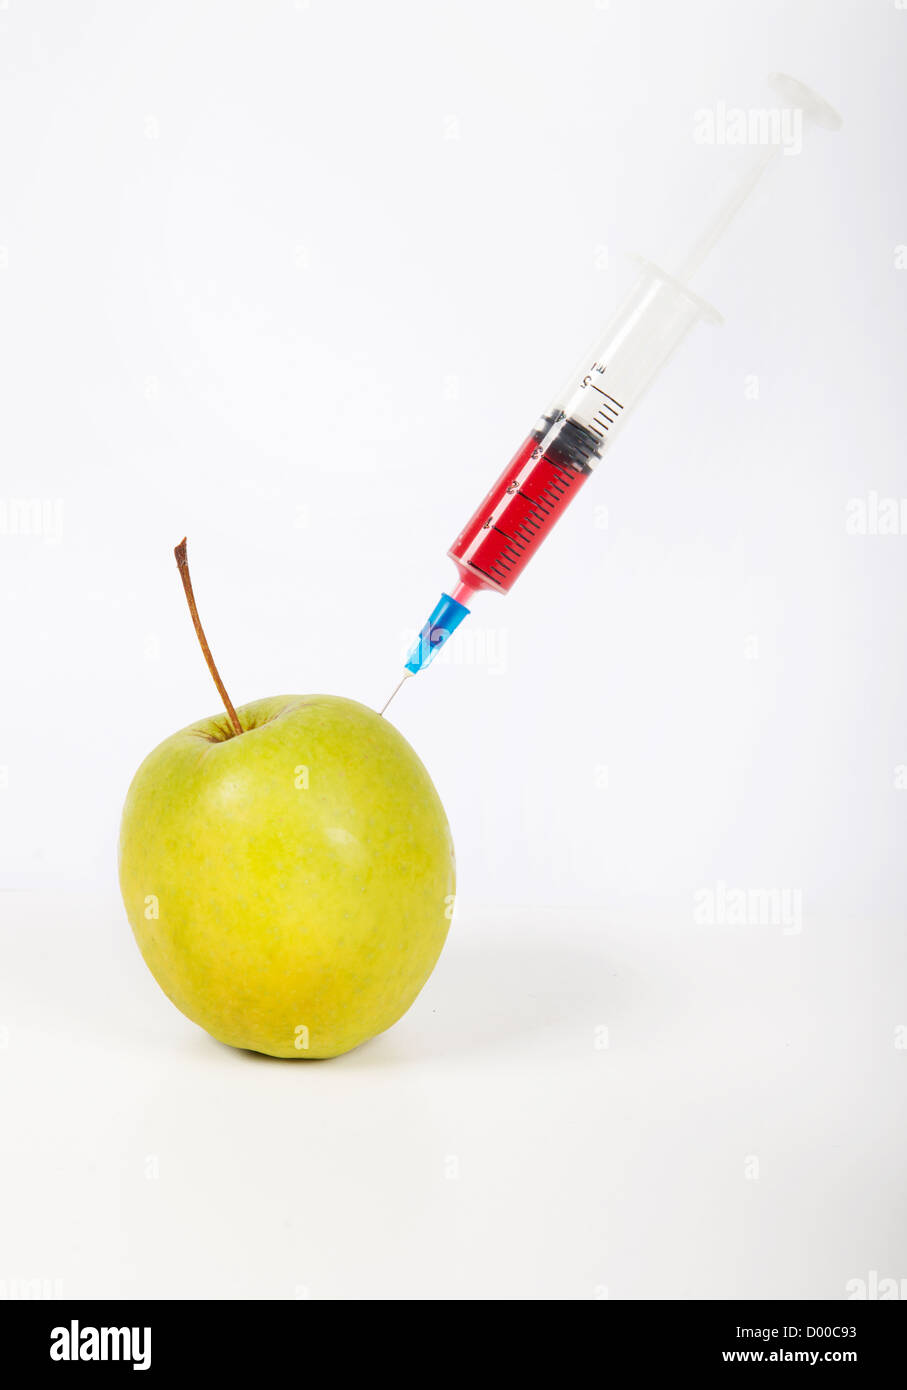 Granny smith apple being injected over white background Stock Photo